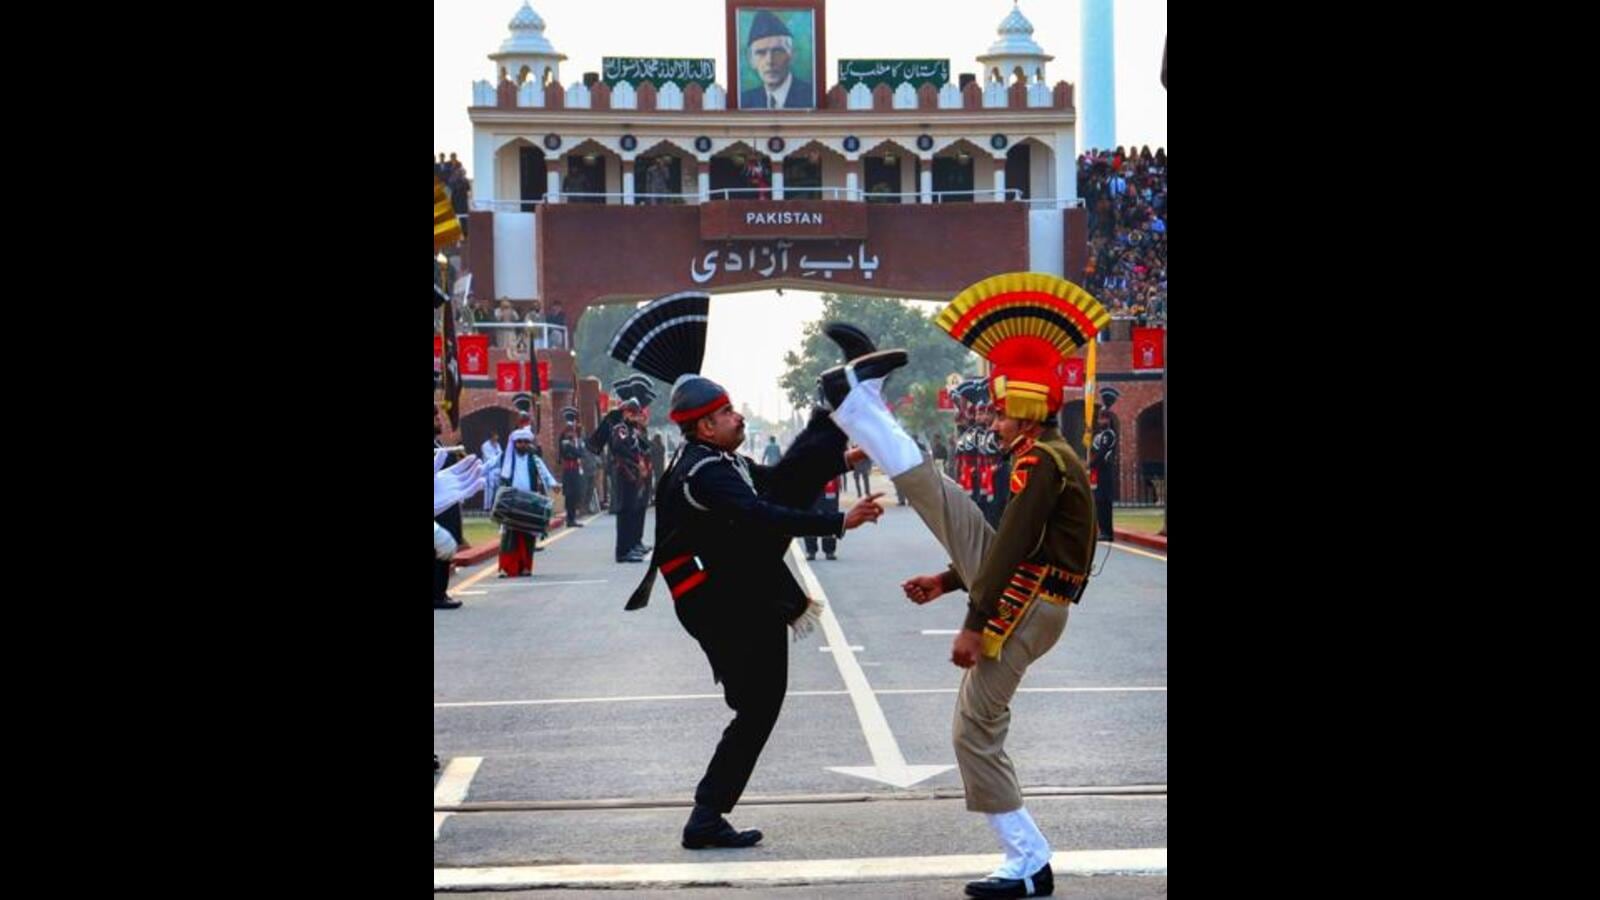 Now, book tickets for ‘Beating Retreat’ ceremony at Attari border via